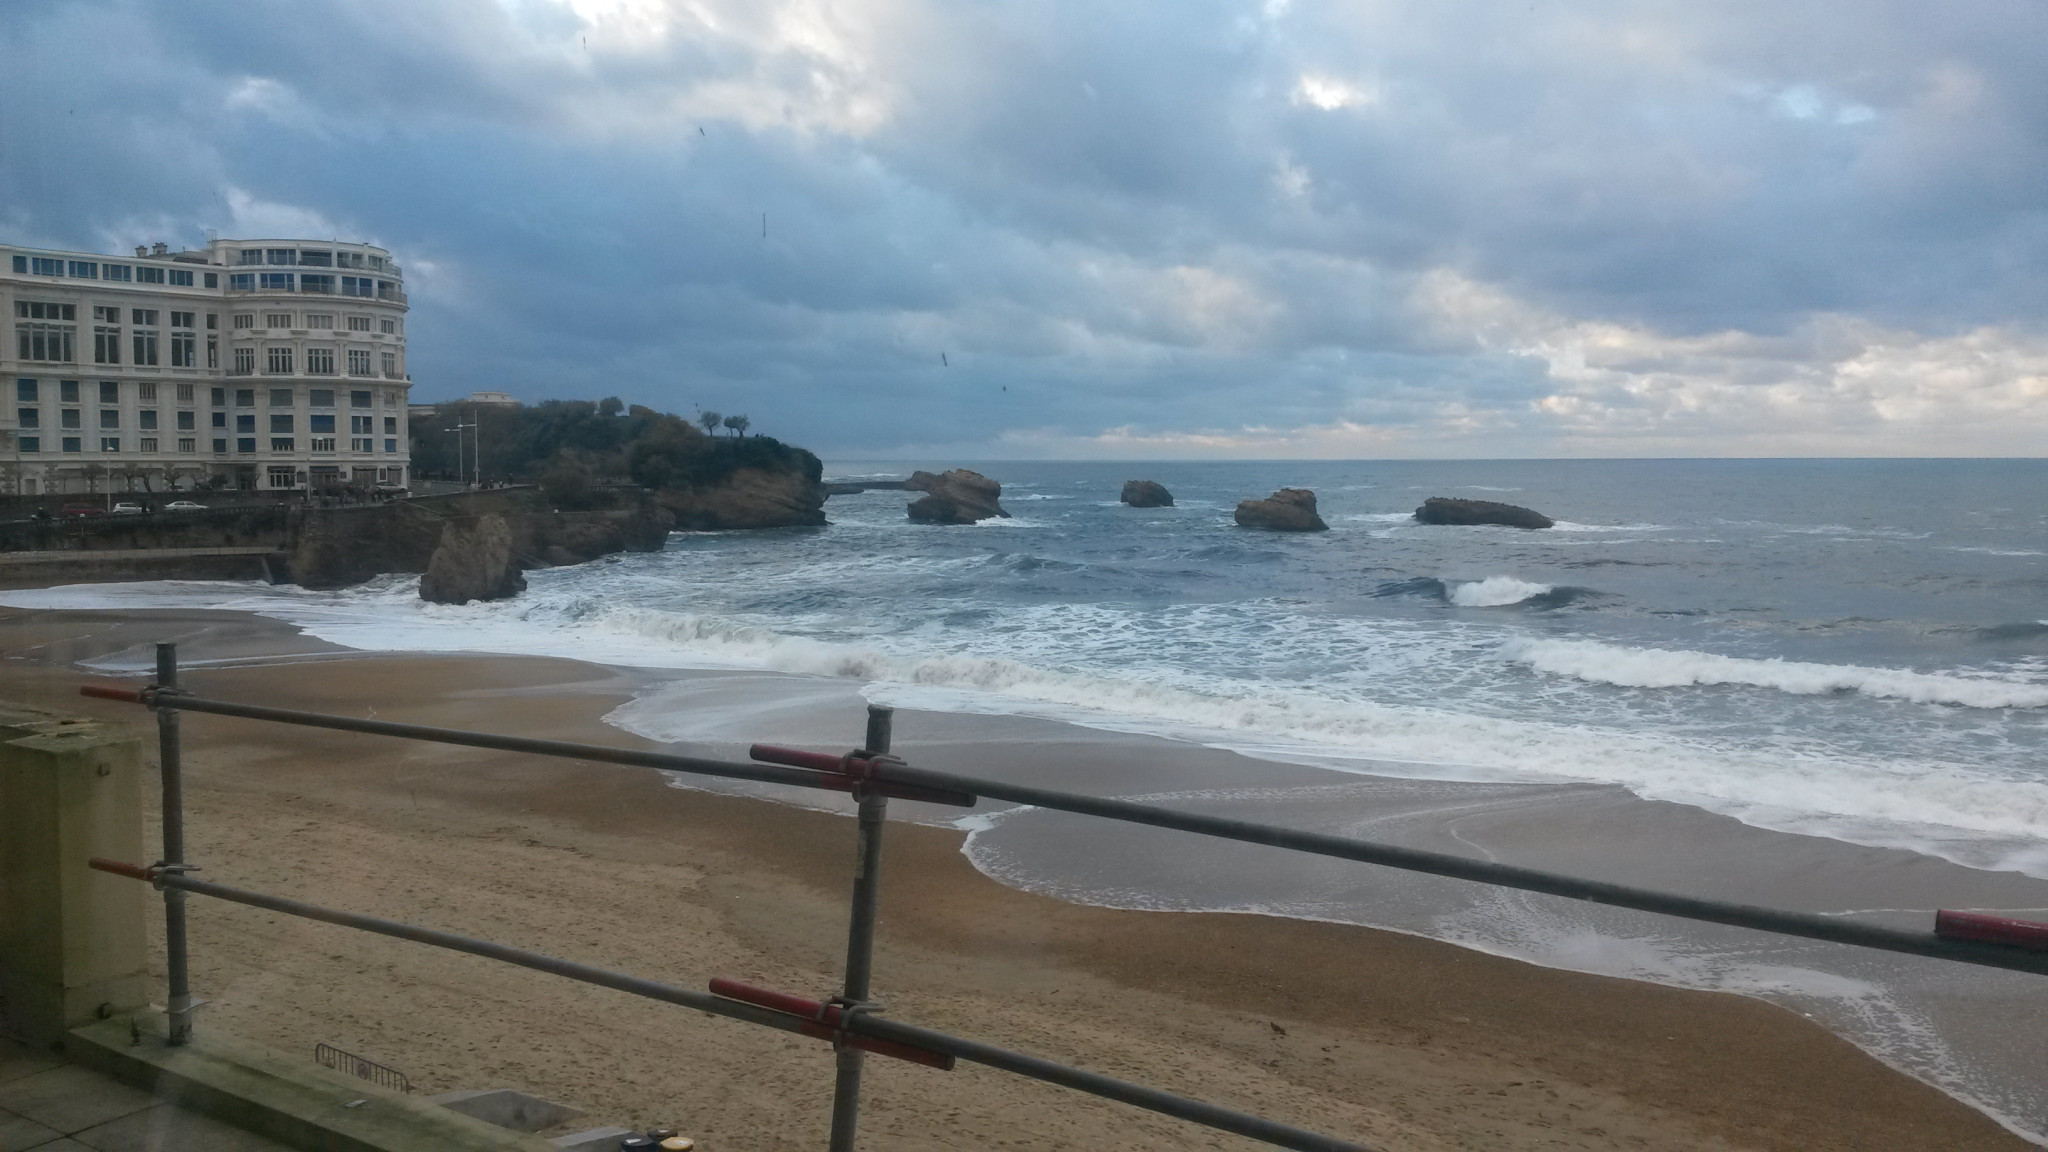 The Grand Plage at Biarritz - view from the first floor of the Casino Municipale where the IFBB World Fitness Championships took place this past weekend ©ITG